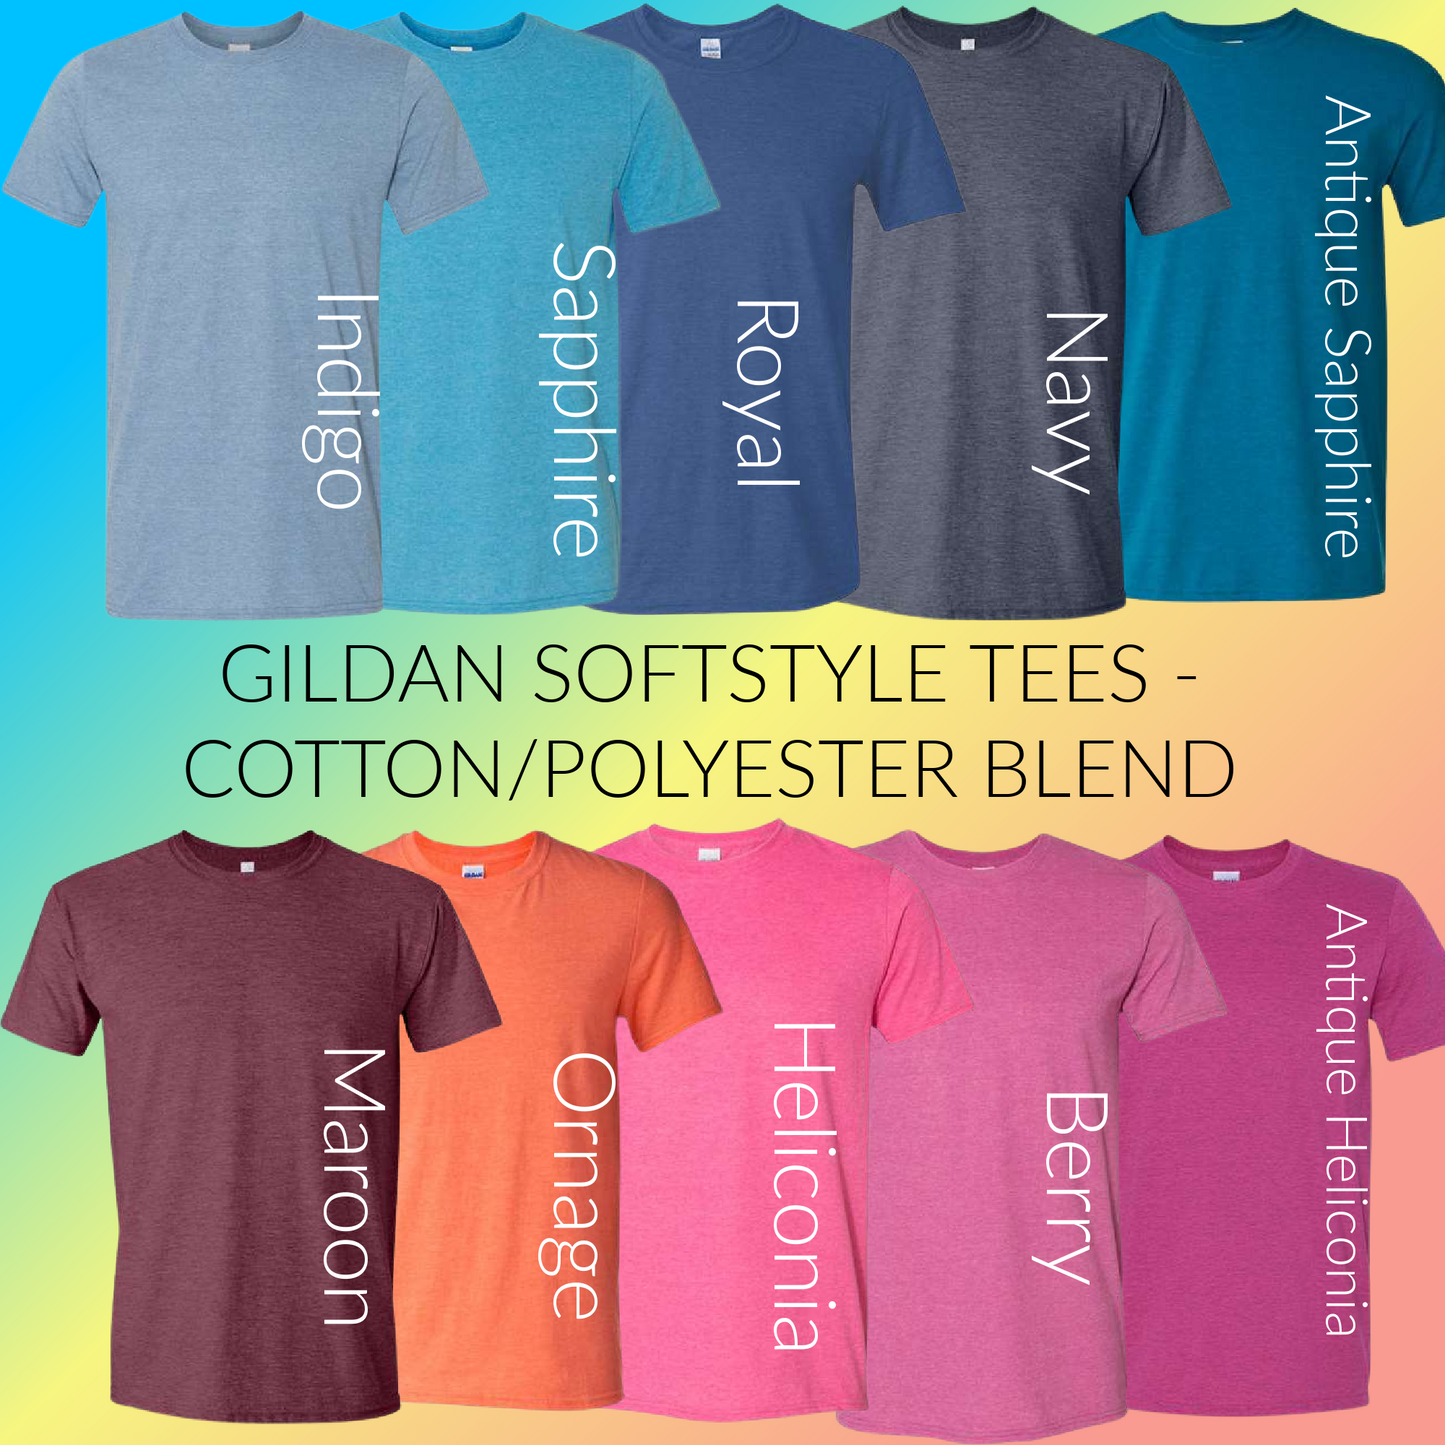 Game Changer Therapy Services - Cotton/Poly Blend - Gildan Softstyle Tee